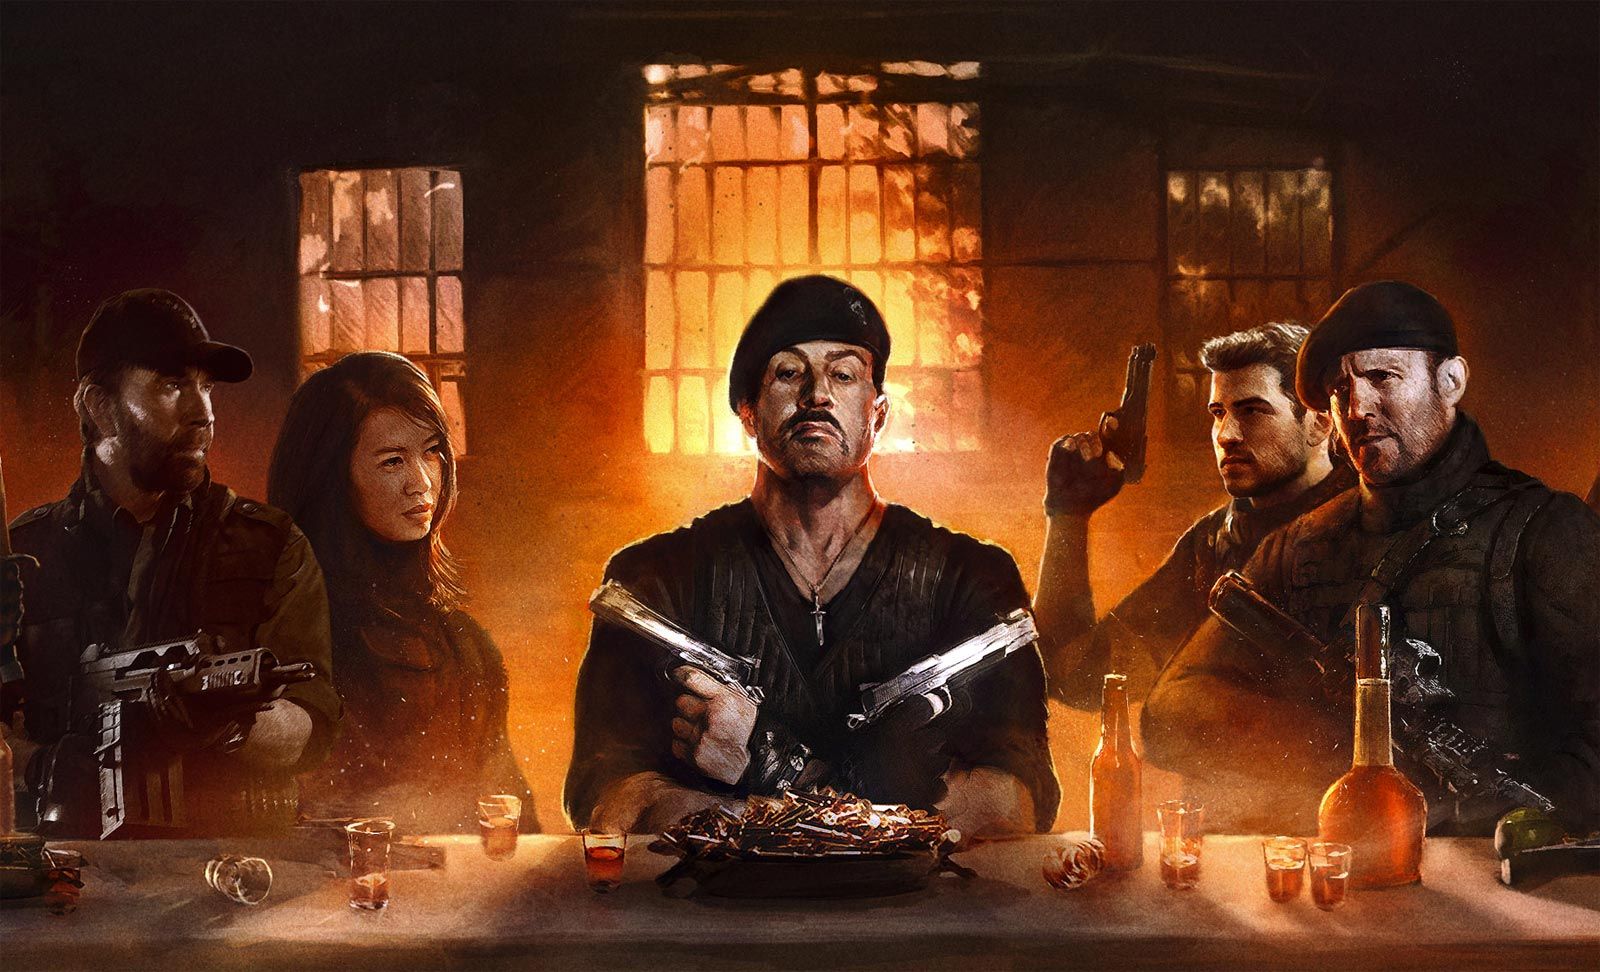 HD wallpaper, Supper, Last, 2, The, Expendables